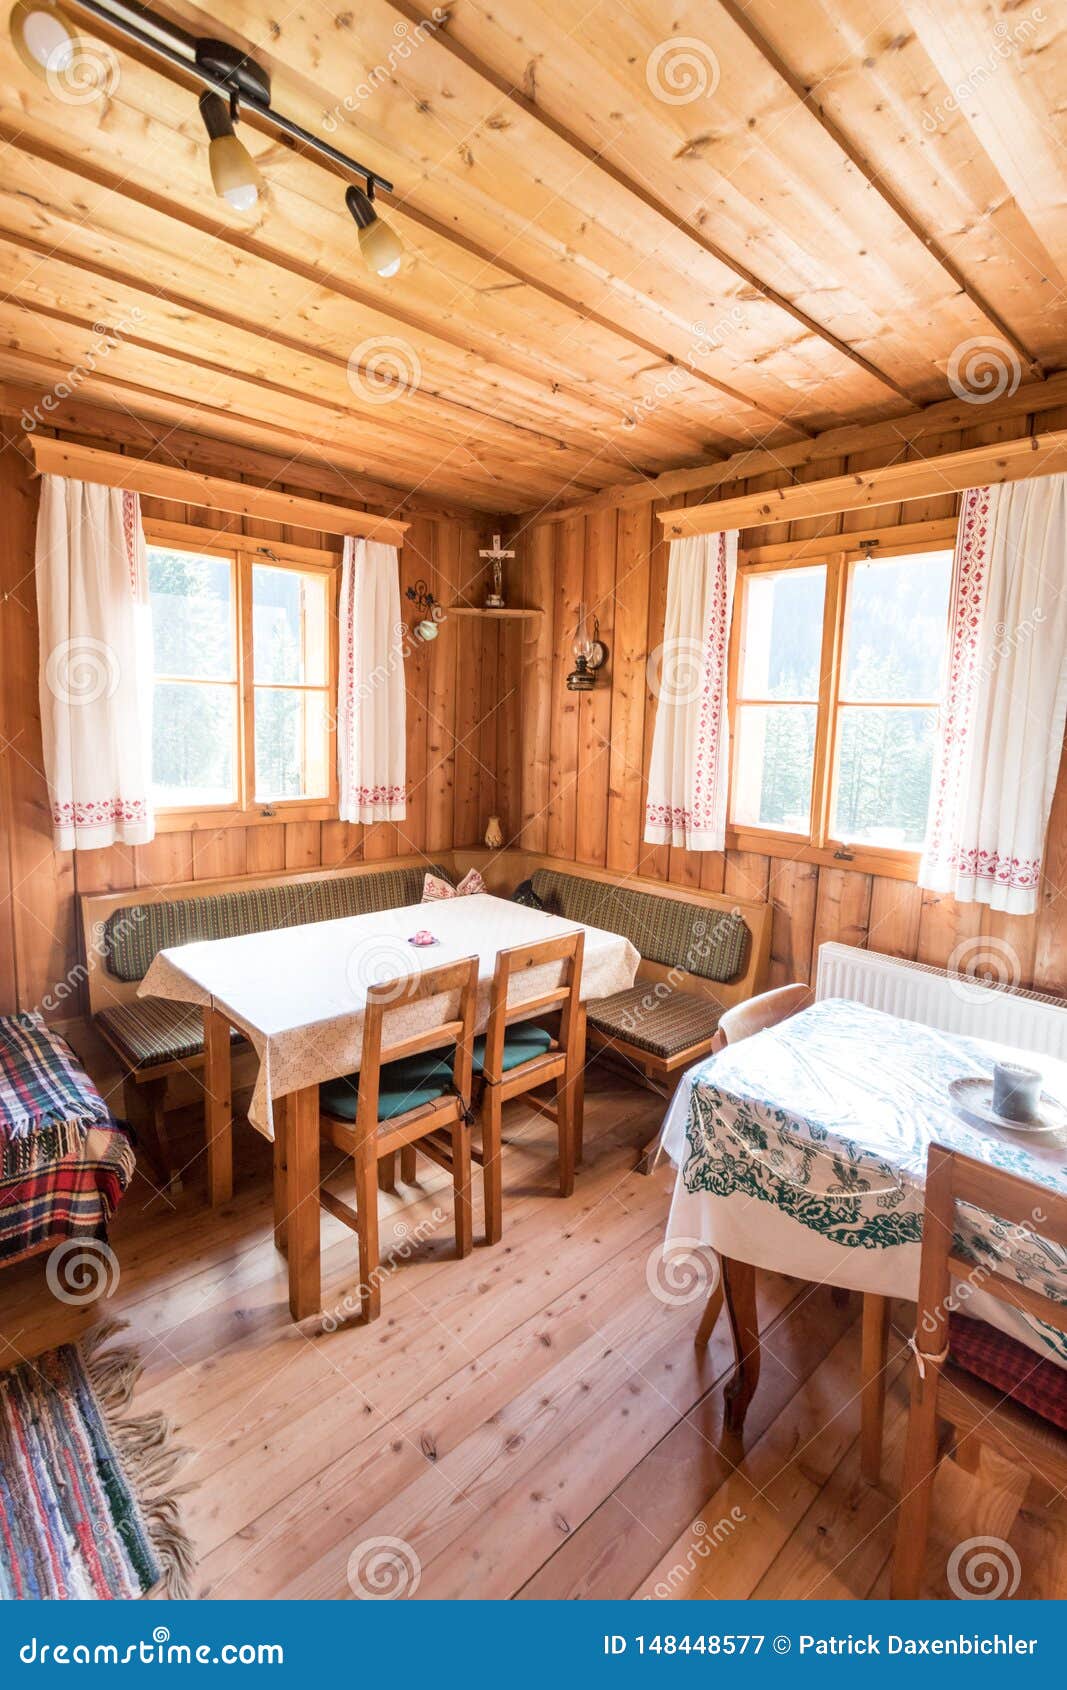 police Revision Store Holiday in the Mountains: Rustic Old Wooden Interior of a Cabin or Hut  Stock Image - Image of restaurant, typical: 148448577